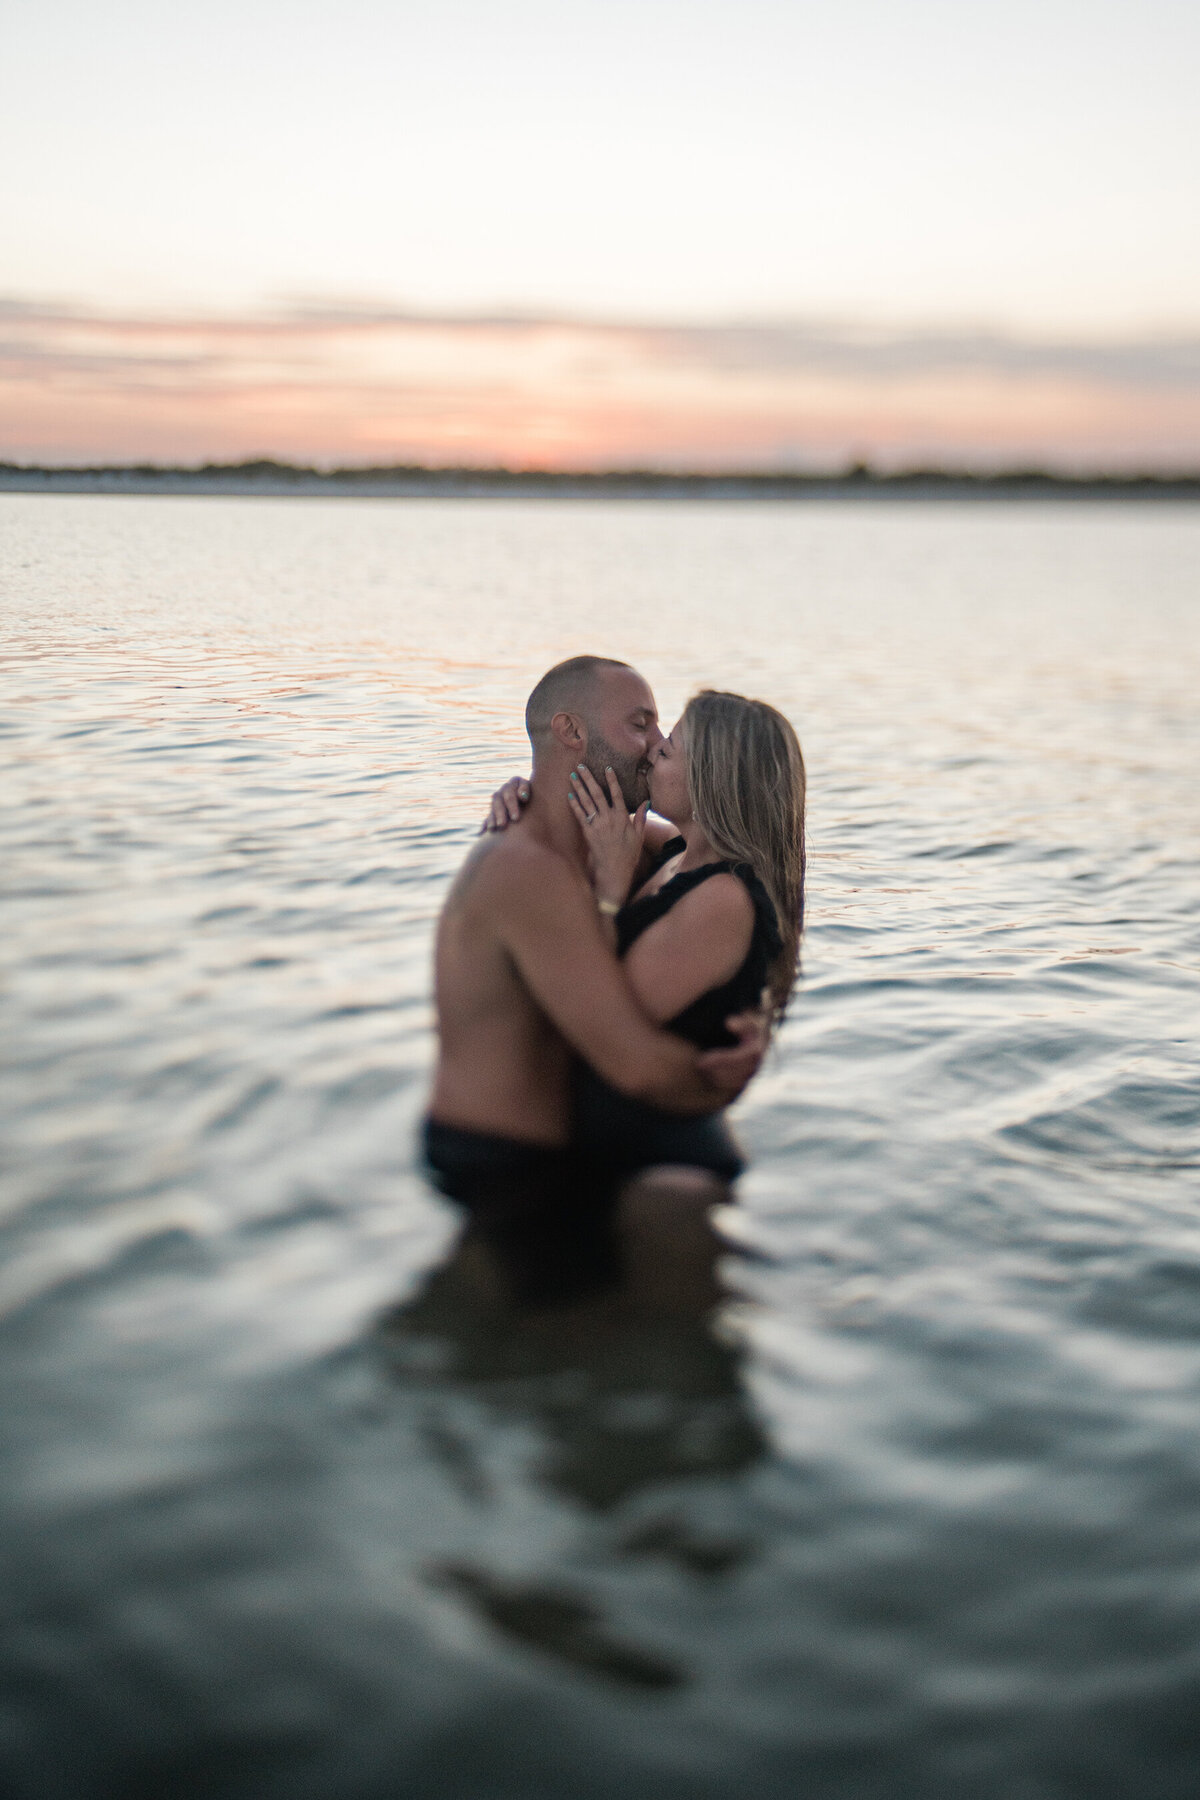 Wrightsville Beach Engagement Session on a boat, Boat Couples session